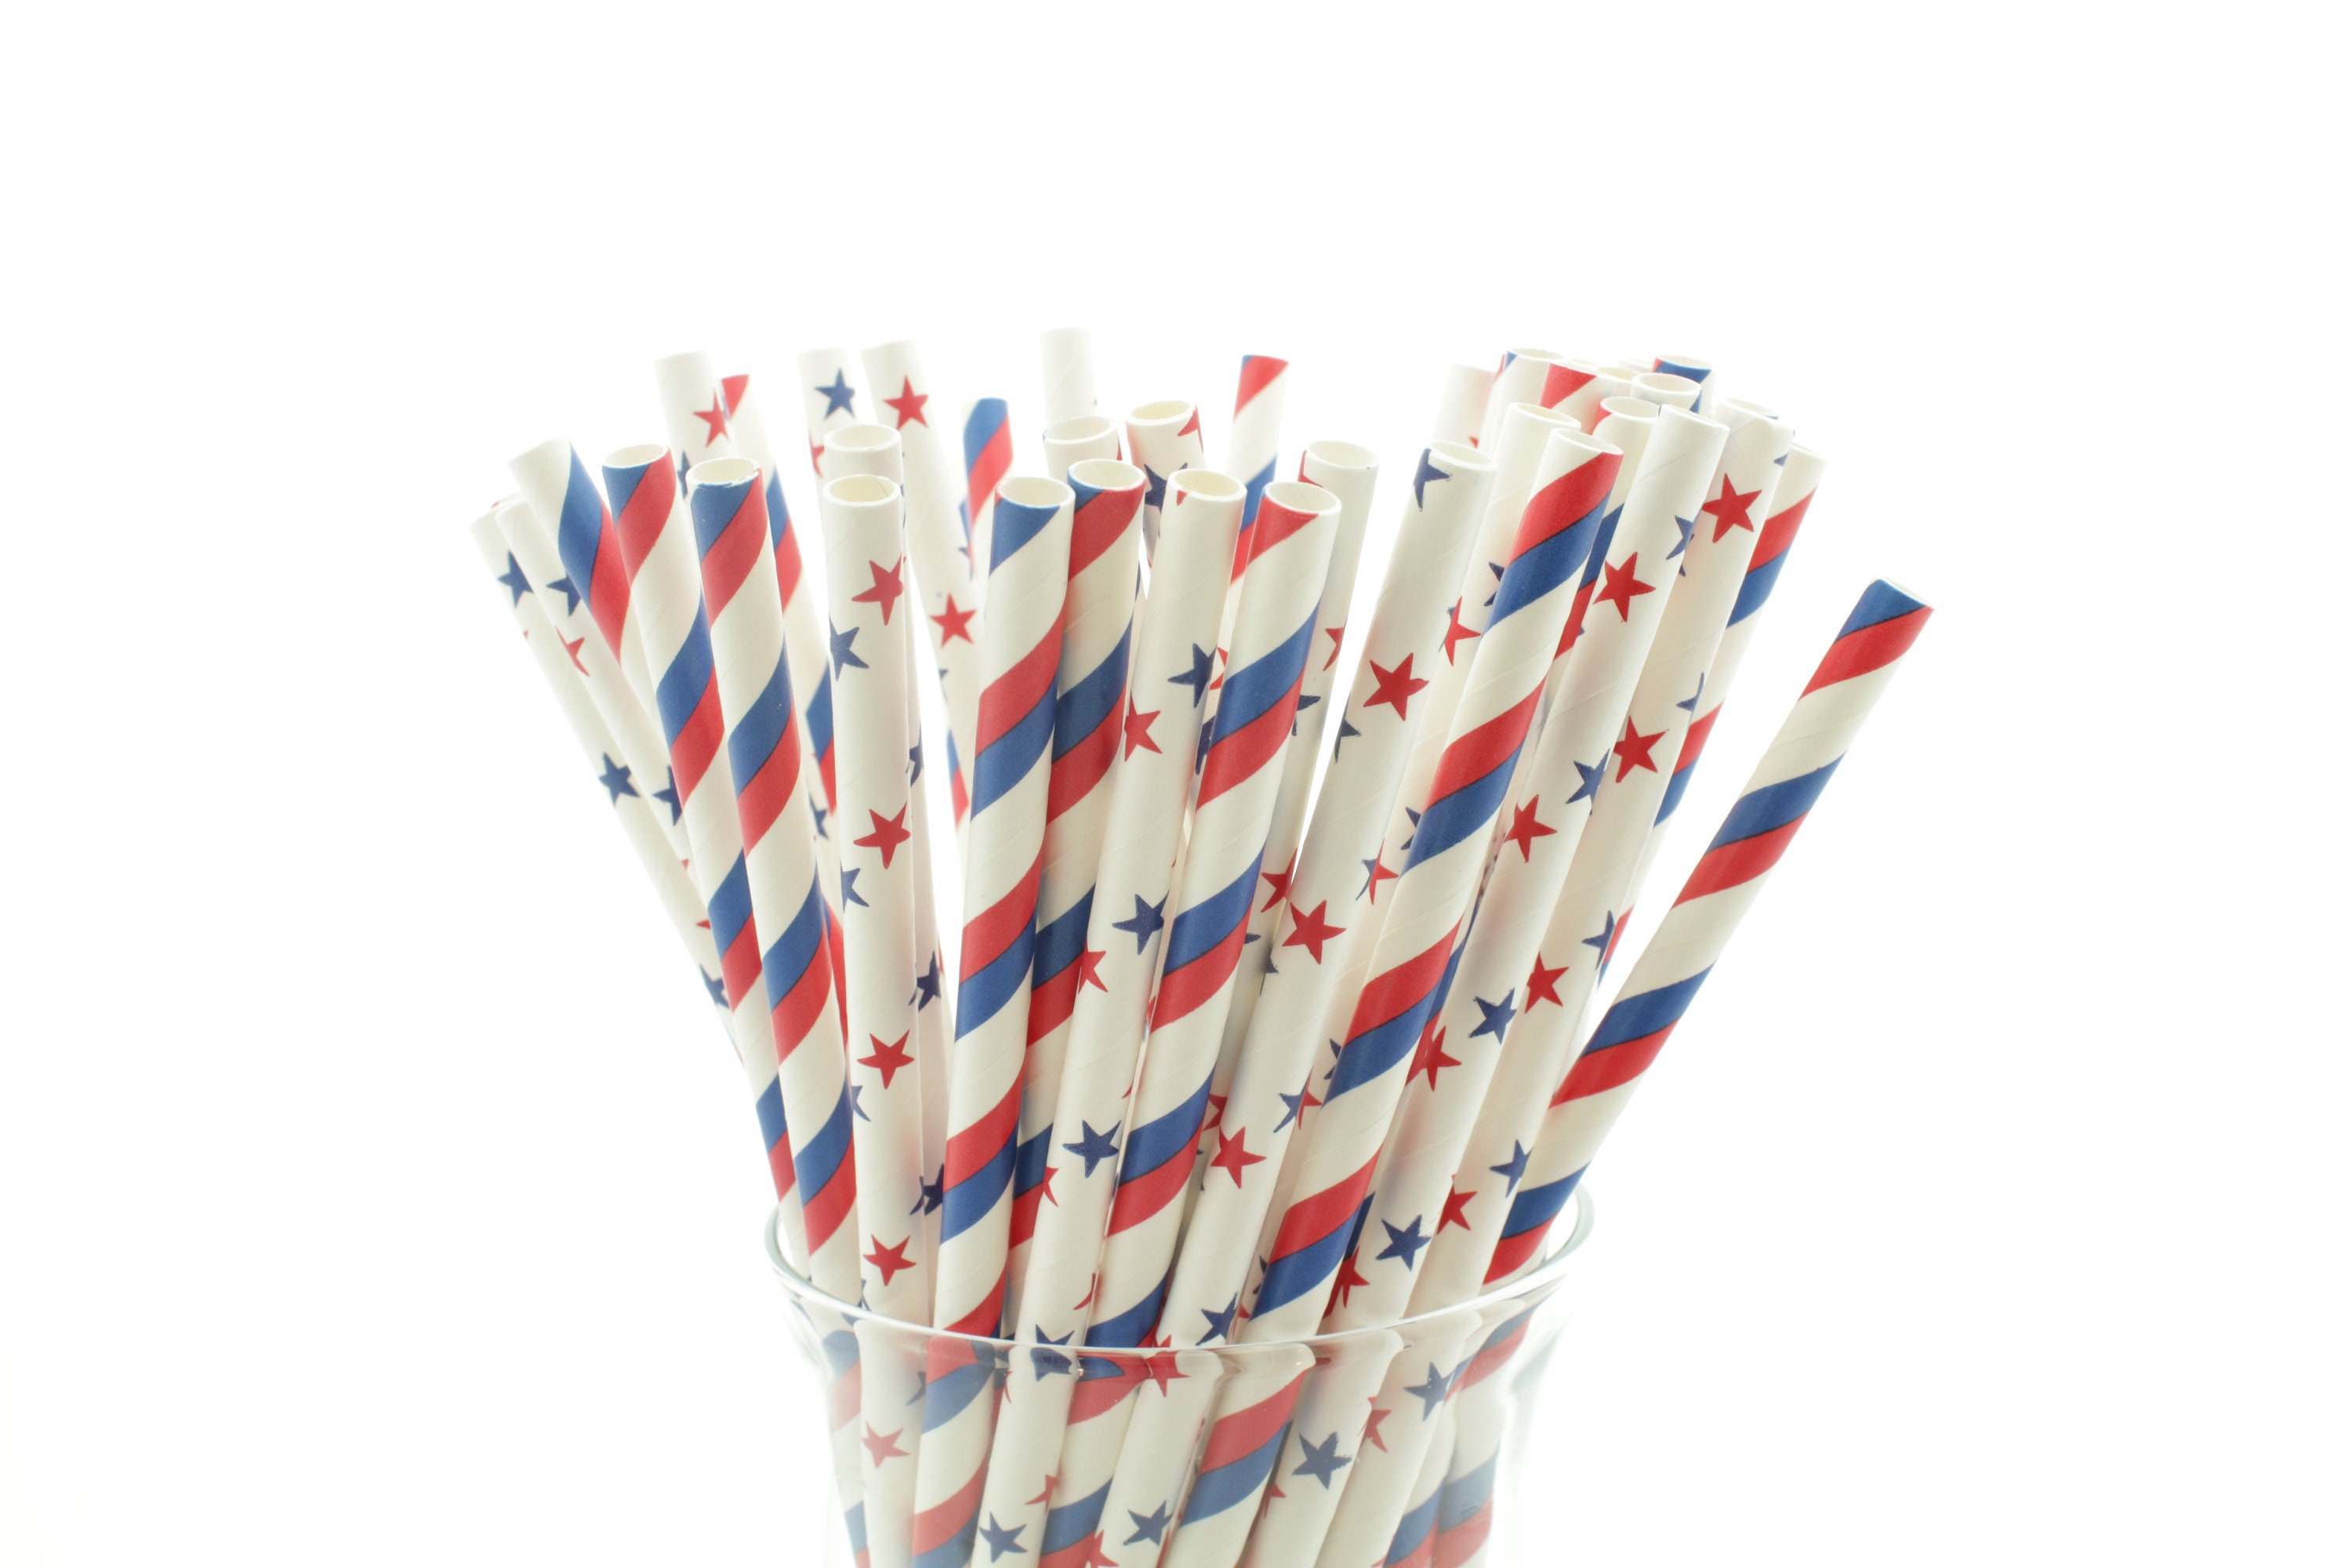 Easter Party Straws (25 Pack) - Pastel Party Decorations and Supplies,  Easter Party Favors